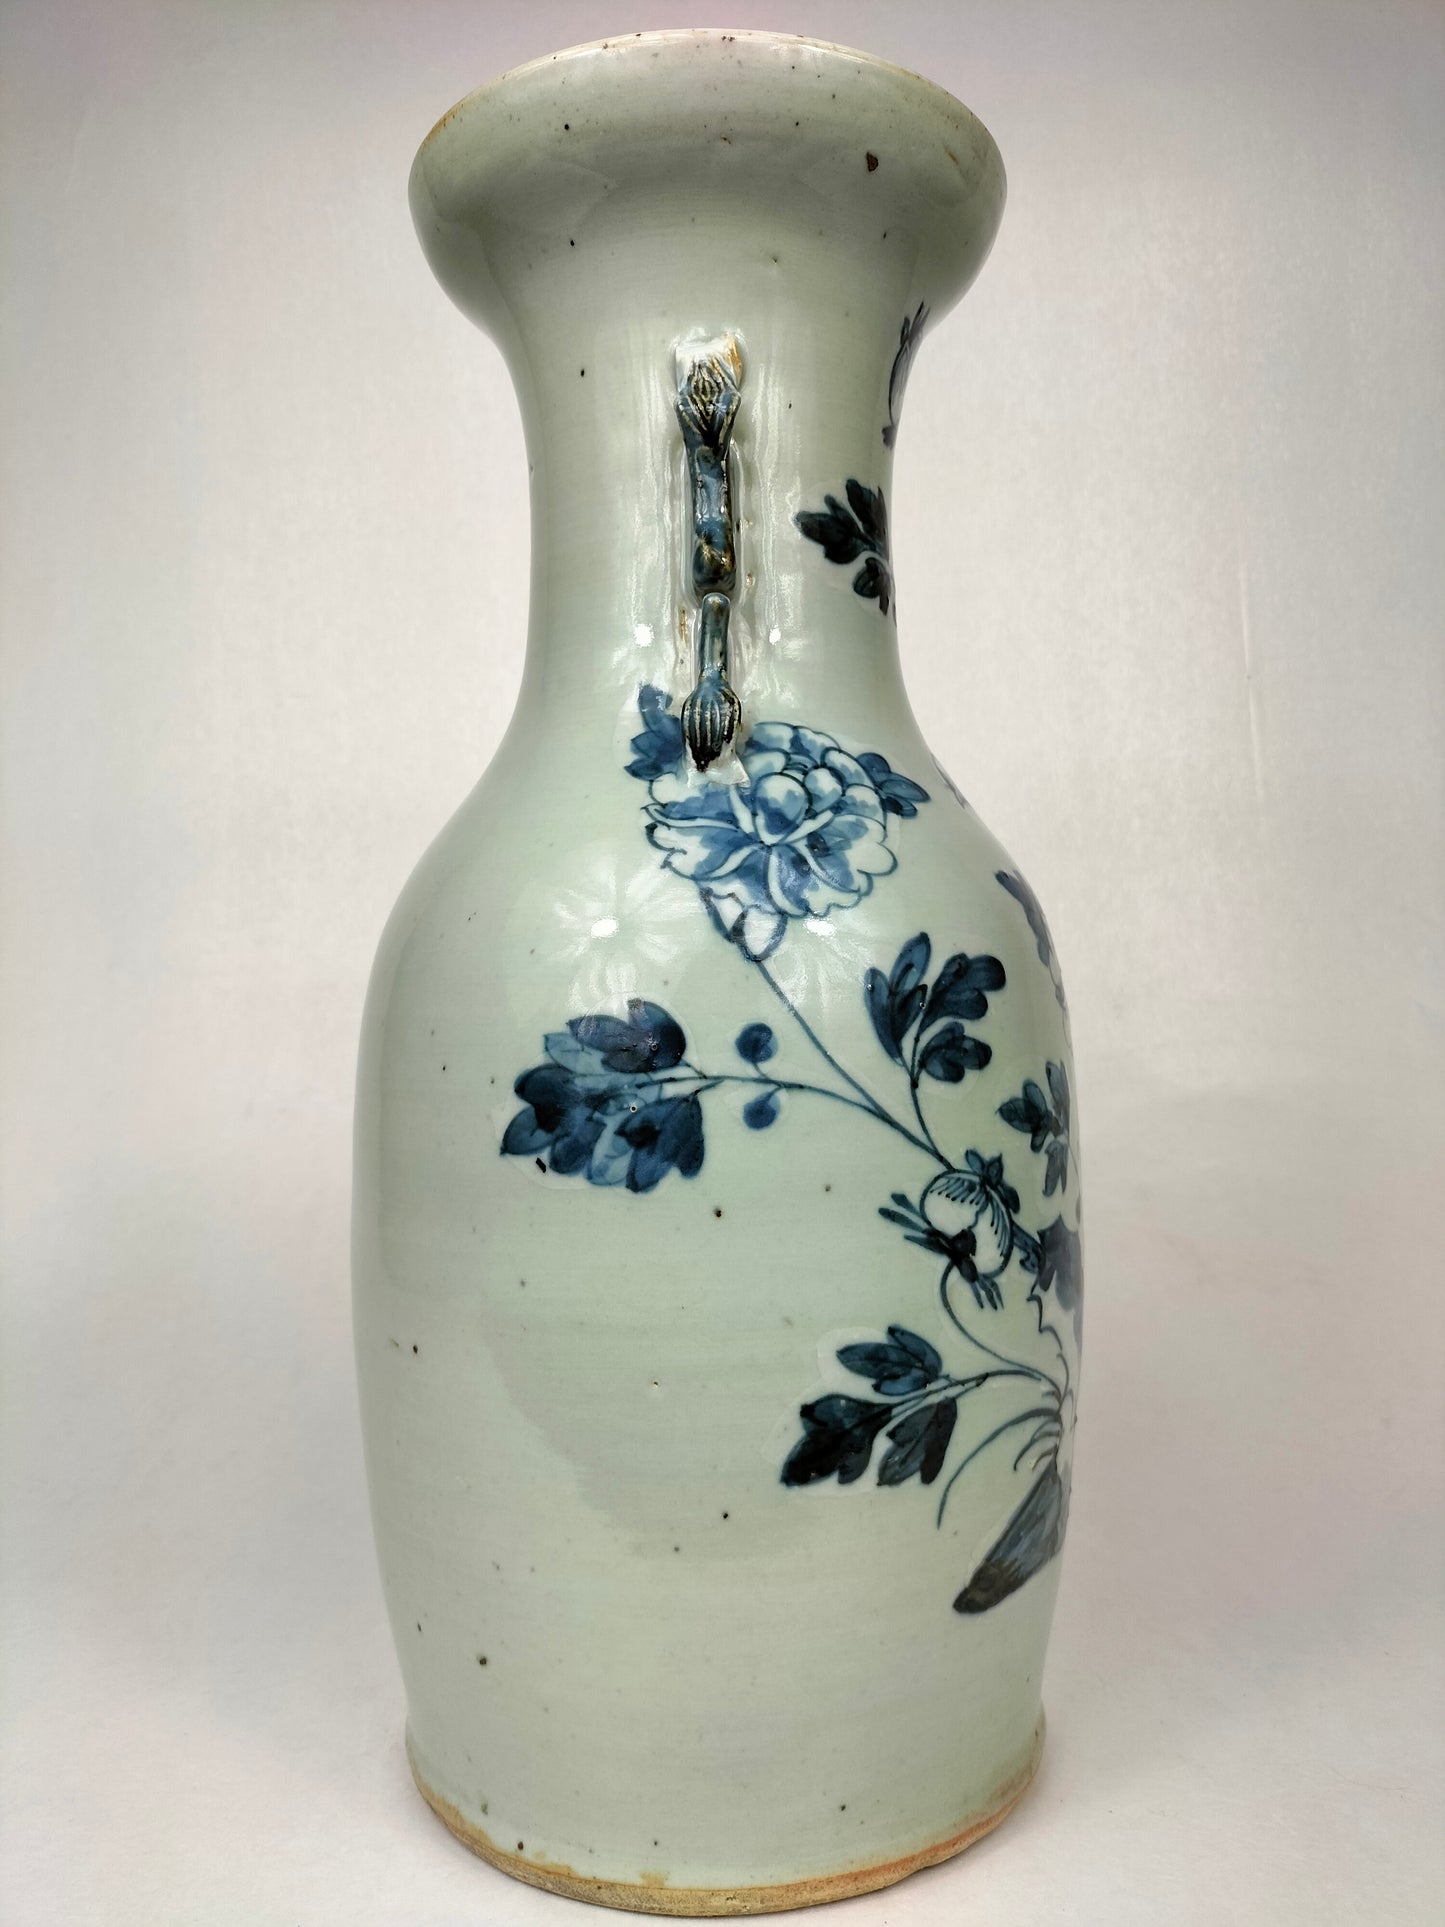 Antique Chinese celadon vase decorated with a bird and flowers // Qing Dynasty - 19th century